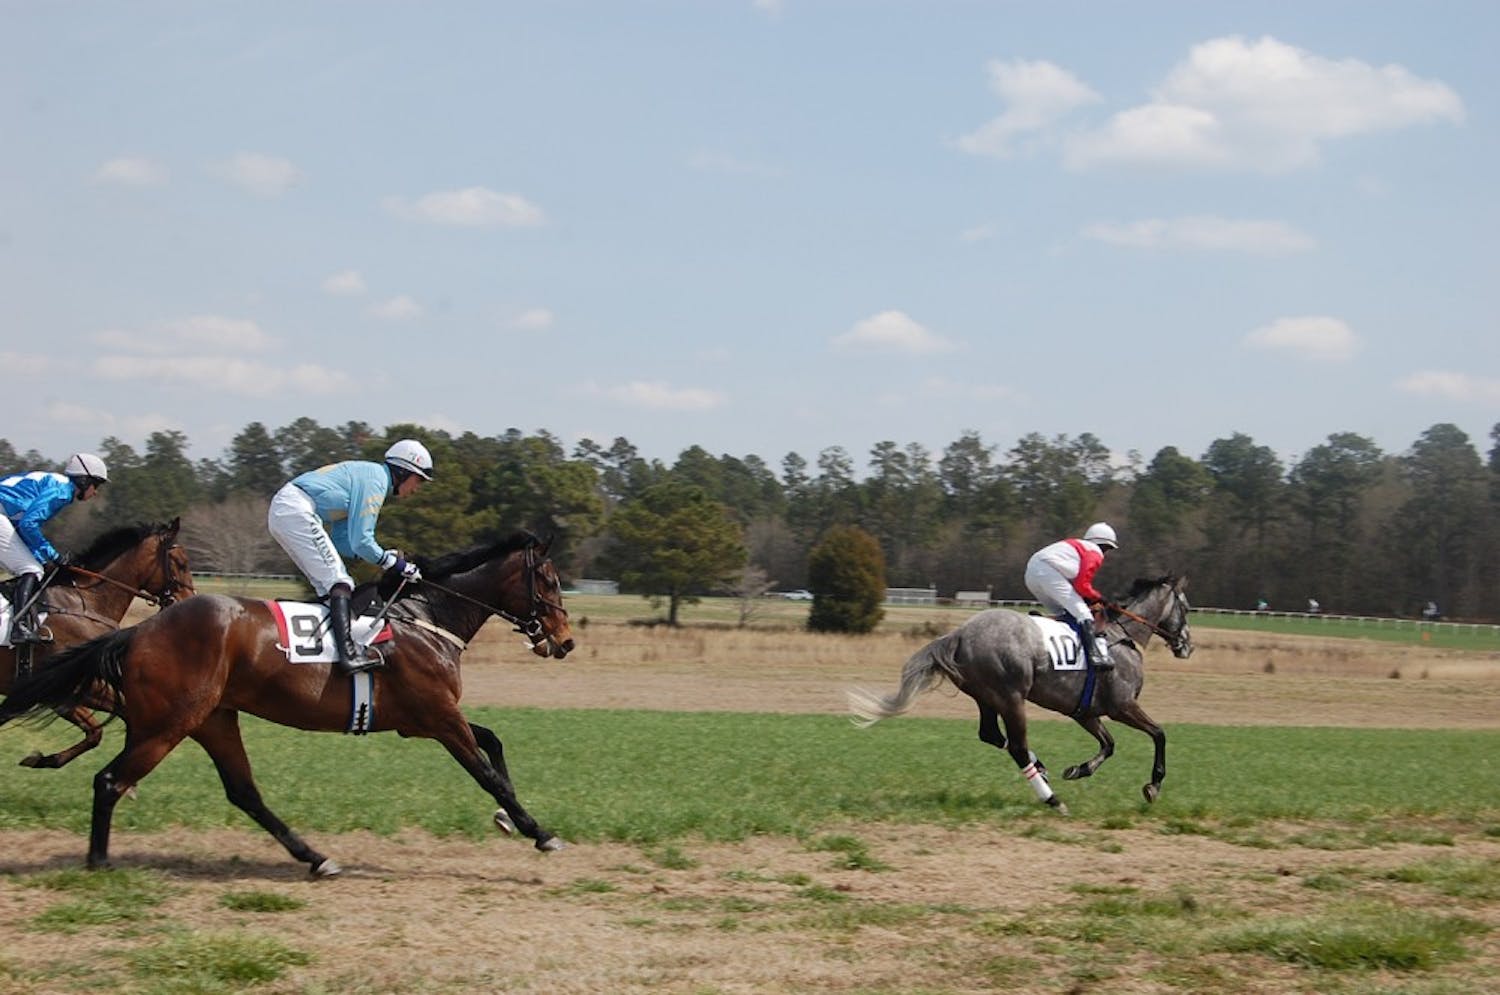 	Six horse races took place at Carolina Cup in Camden Saturday. Ross Geraghty rode Alajmal, a 5-year-old gelding, to win the eponymous 2 1/8 mile race.